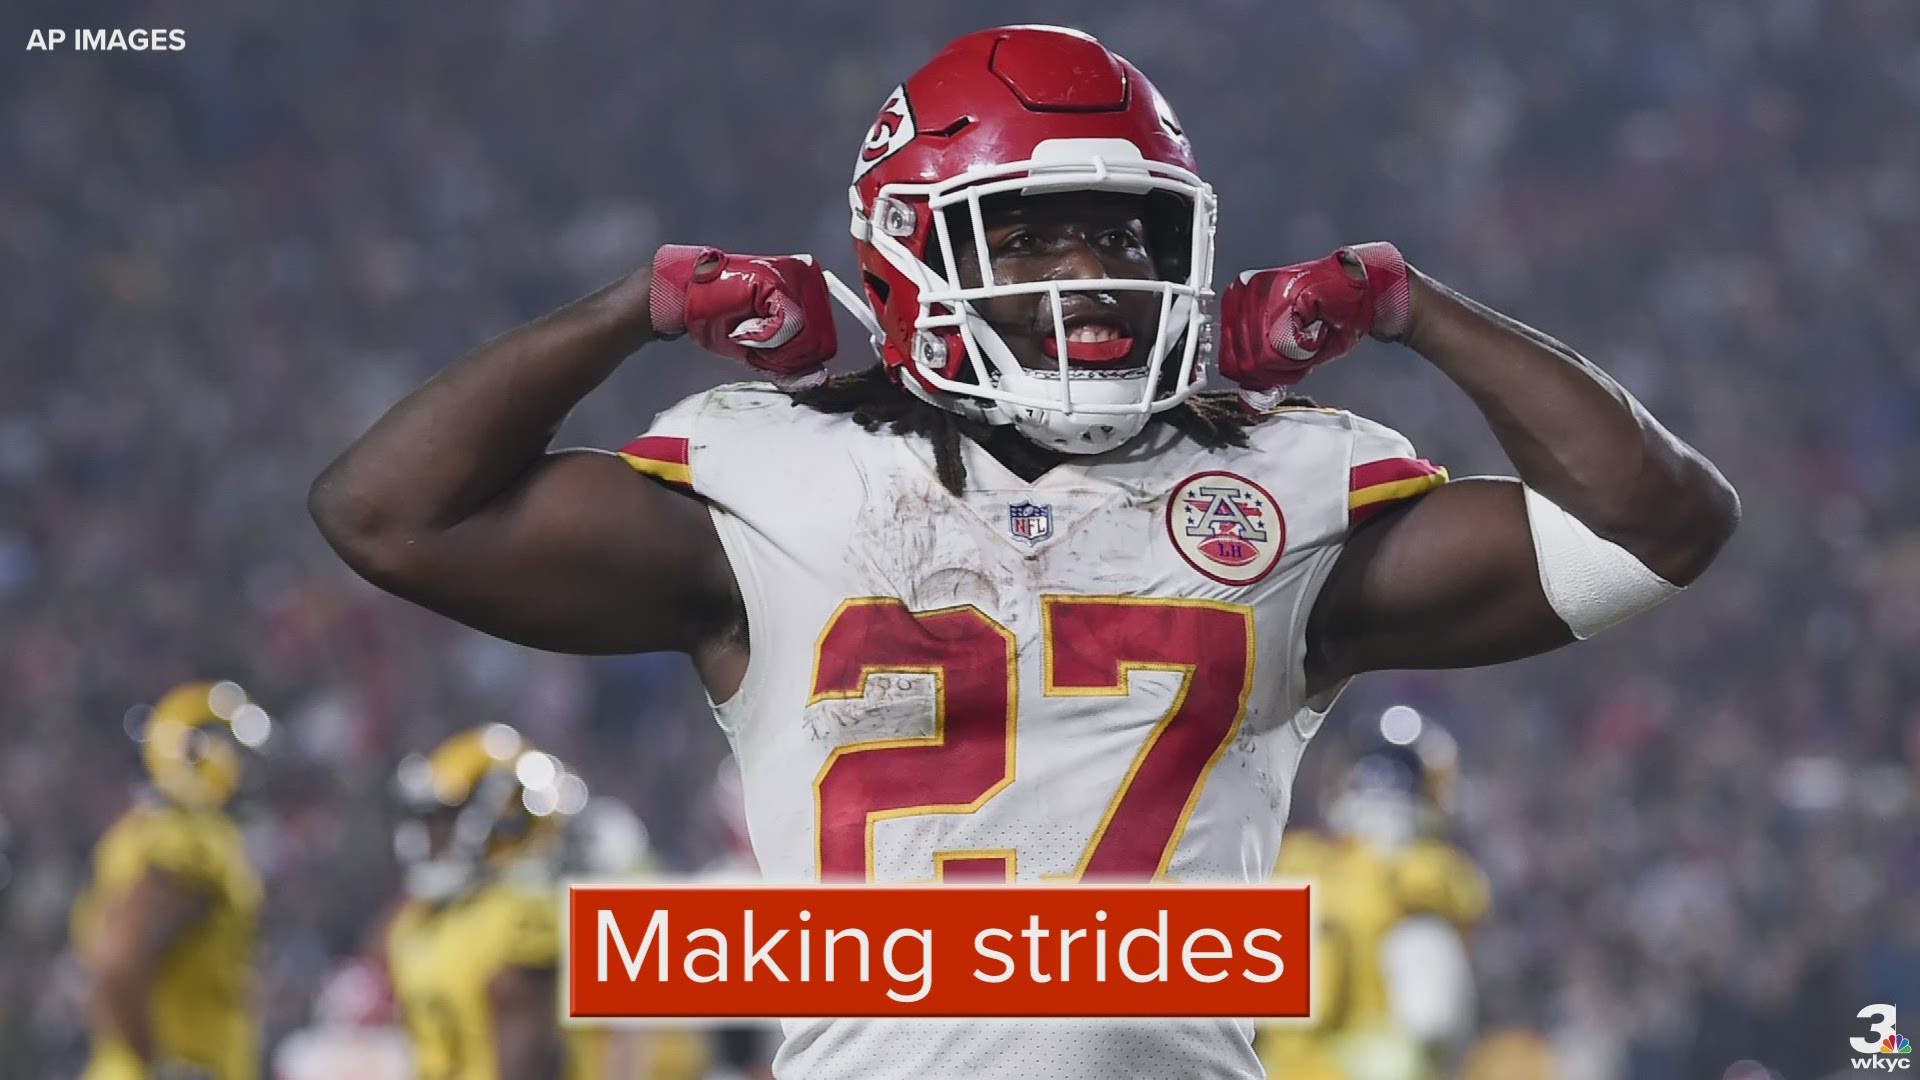 Cleveland Browns coach Freddie Kitchens says running back Kareem Hunt continues to work on being a better person after assaulting a woman last February.